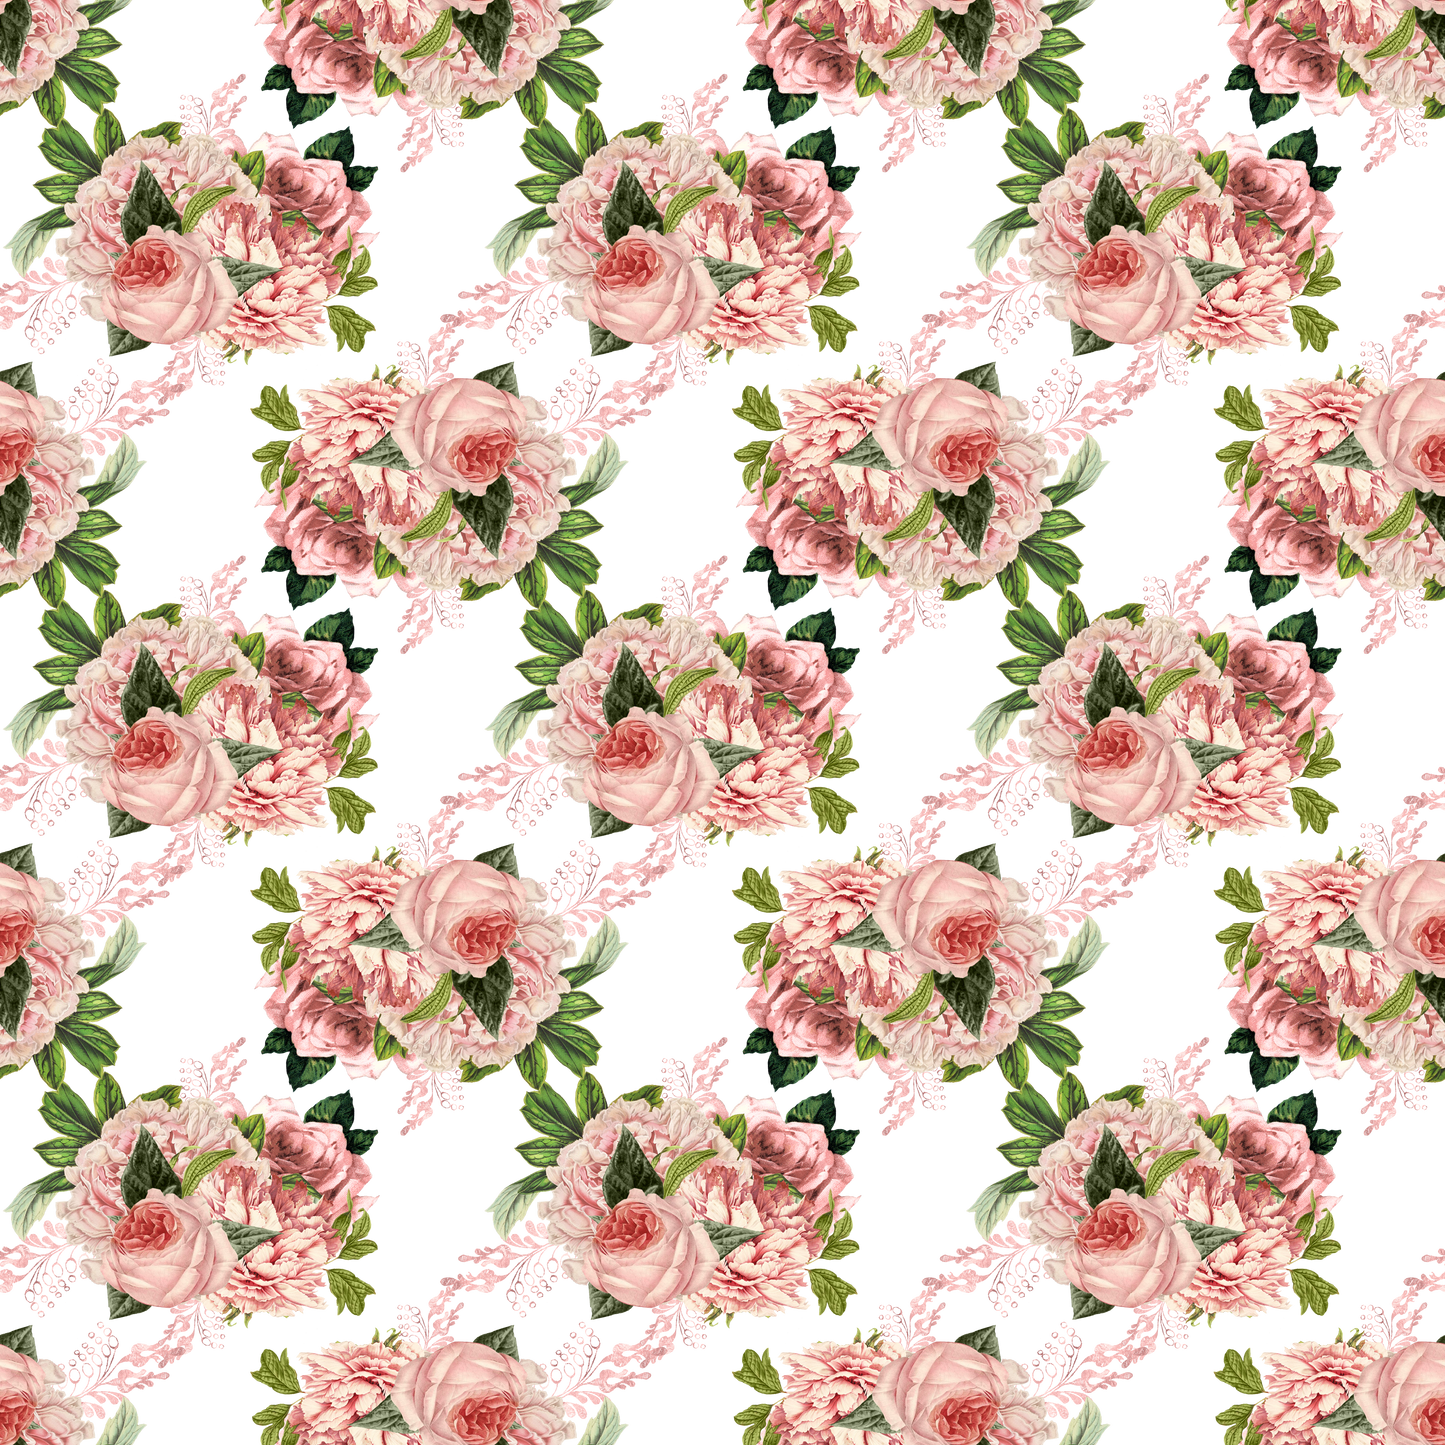 HOLOGRAPHIC FLOWERS - MULTIPLE VARIATIONS